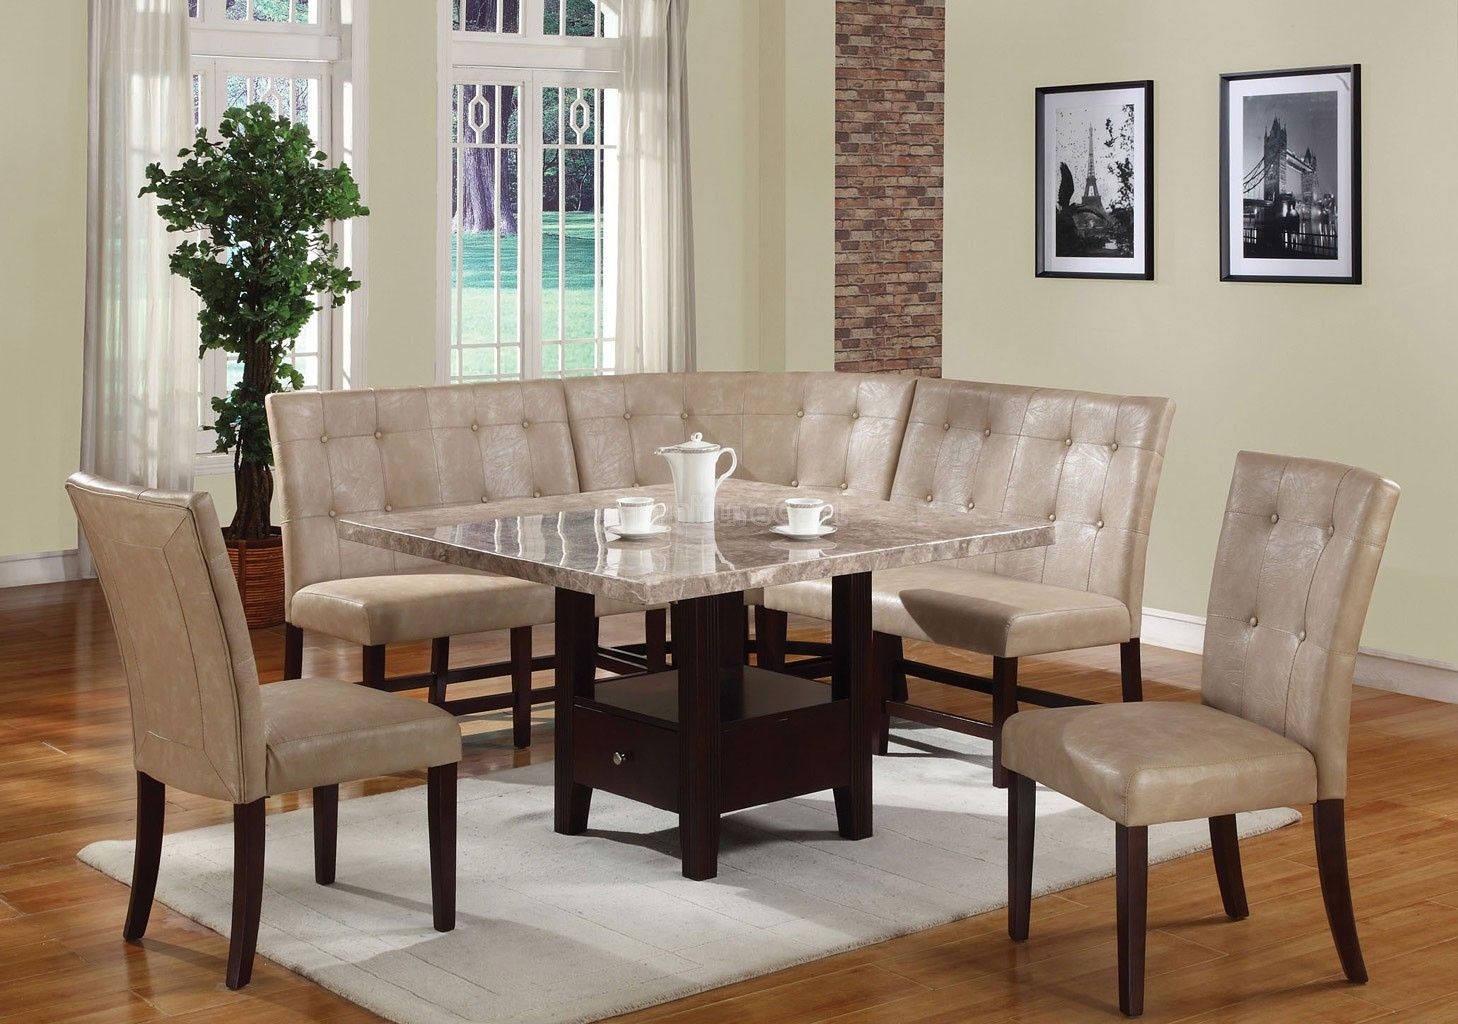 Marble top dining table set 2